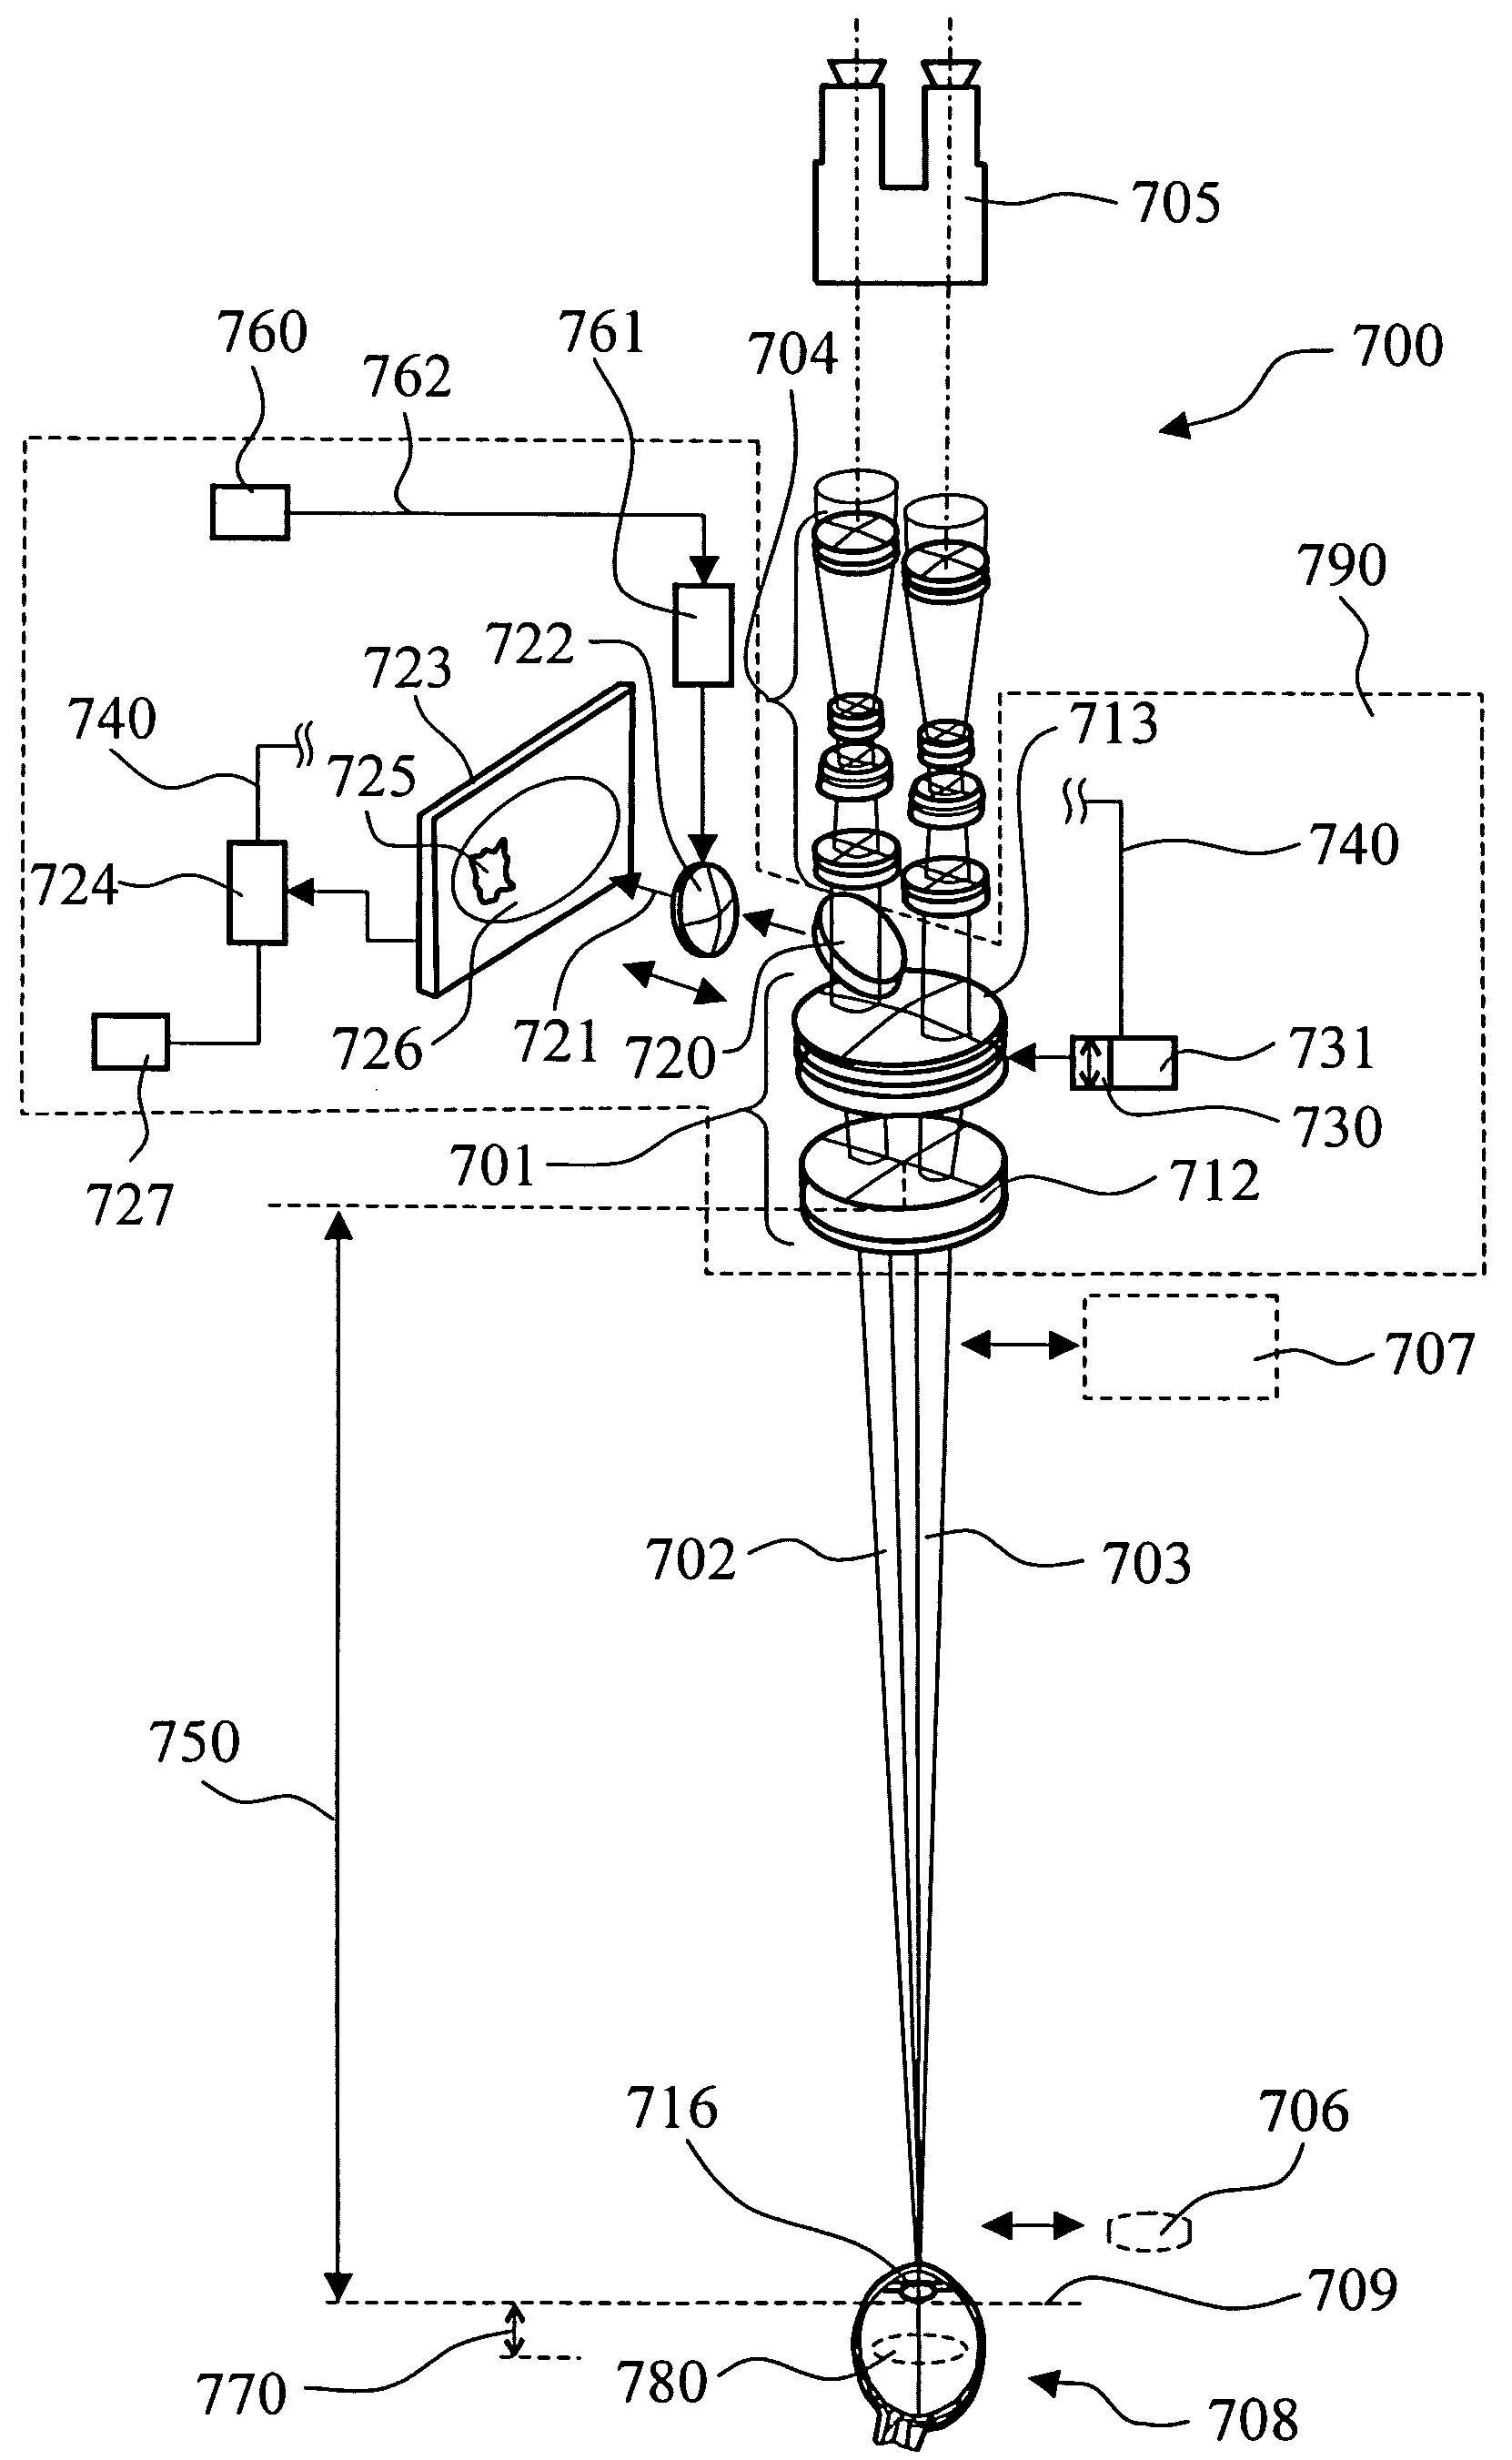 Ophthalmologic surgical microscope having focus offset